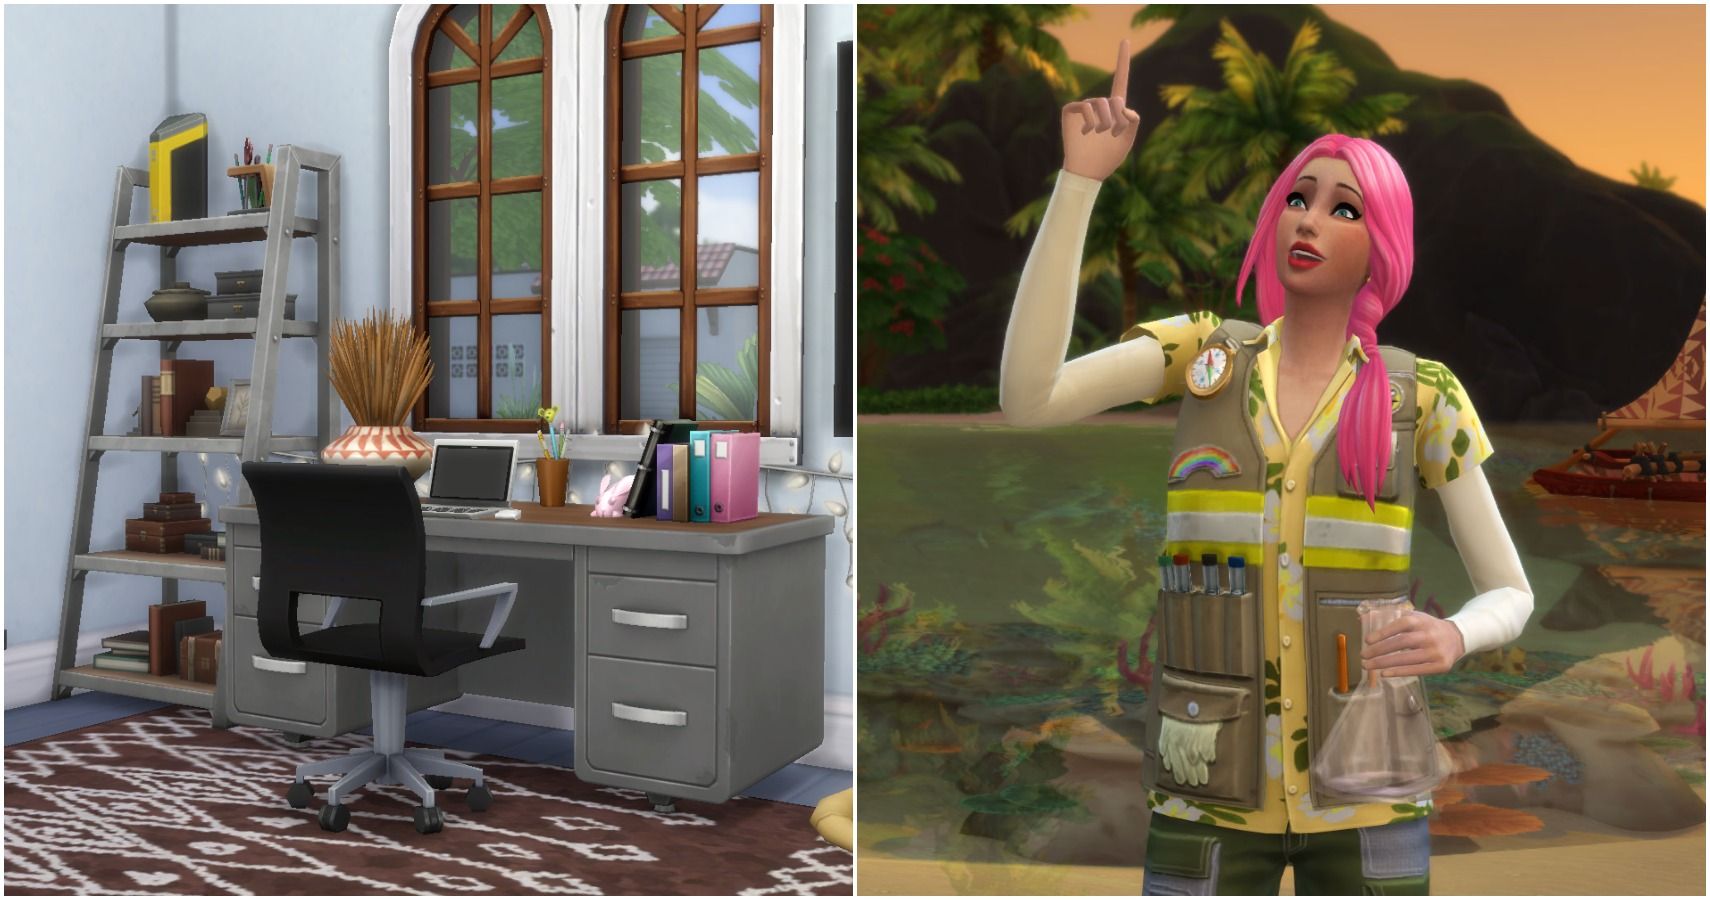 The Sims 4 The Best Career For Your Sim Based On The University They Attended